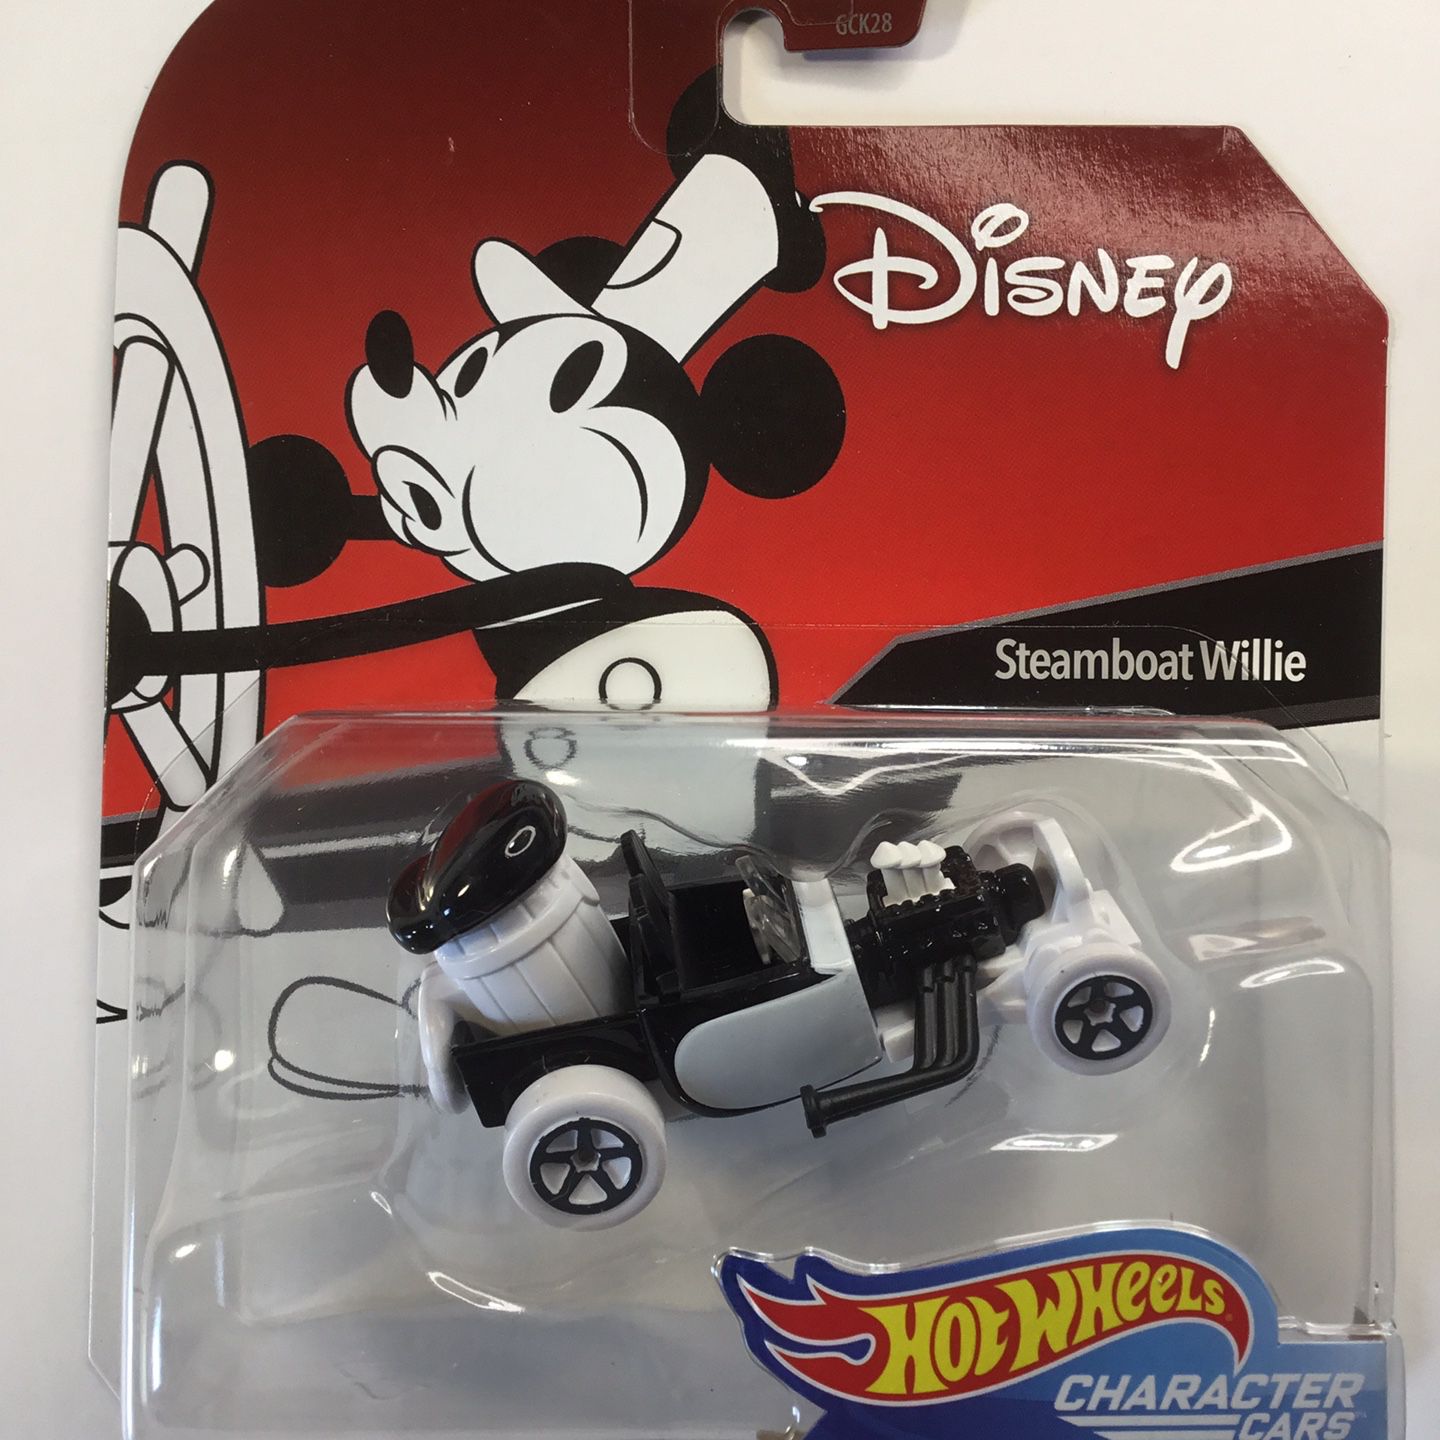 HOT WHEELS DISNEY STEAMBOAT WILLIE CHARACTER CAR